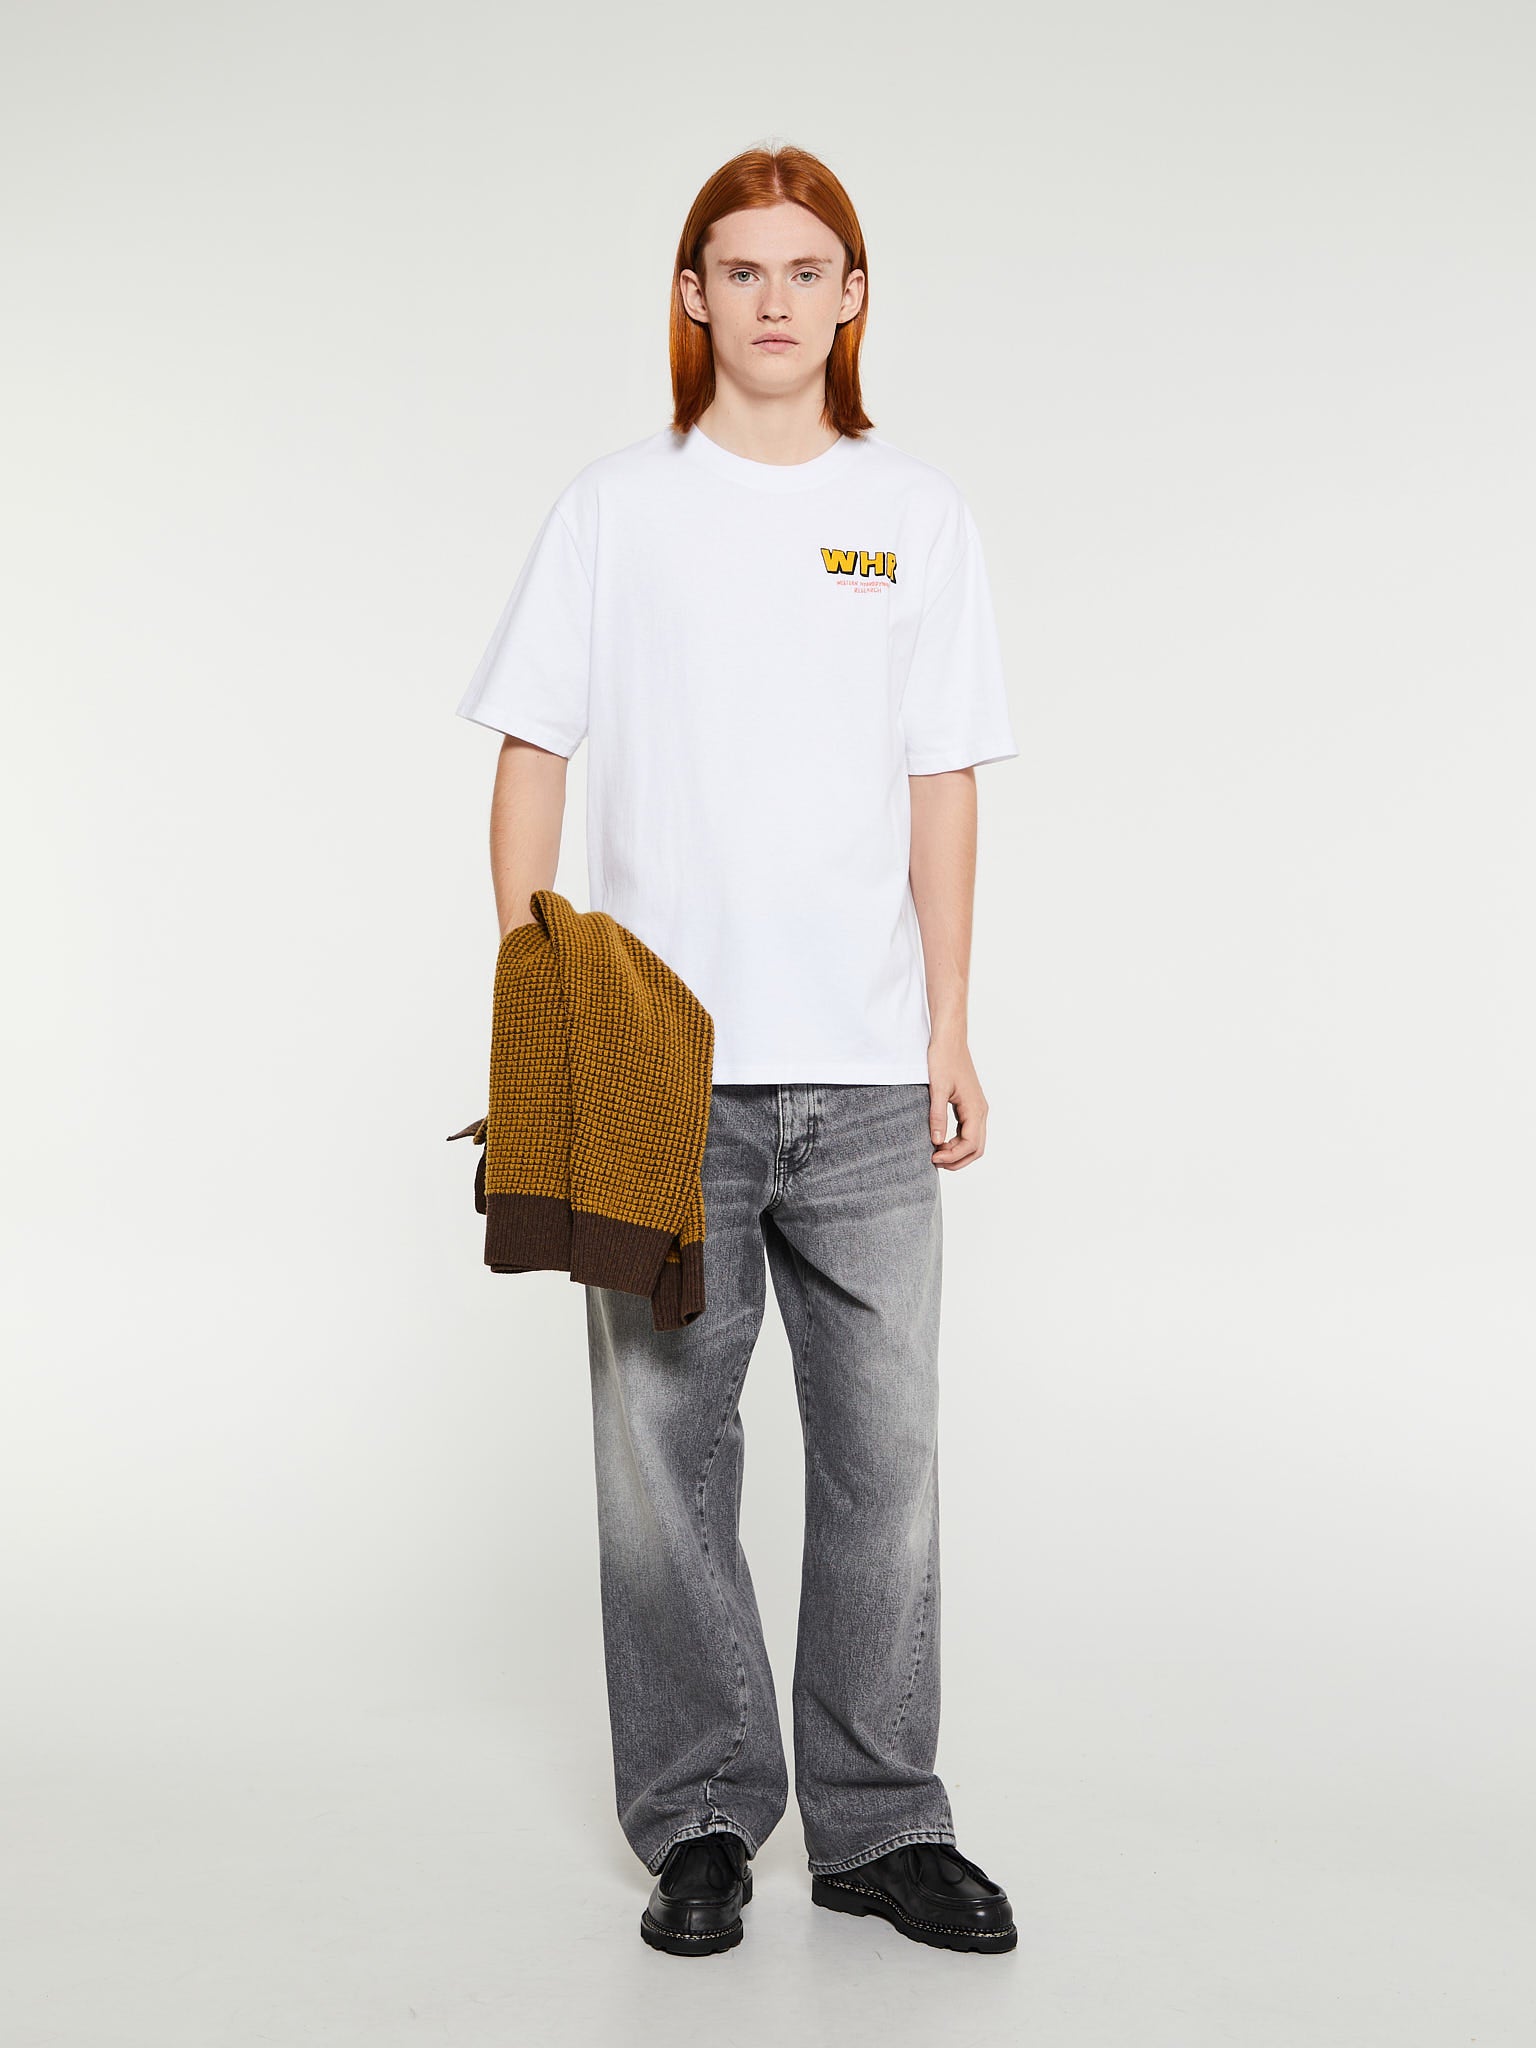 Wobbly Worker Tee in White